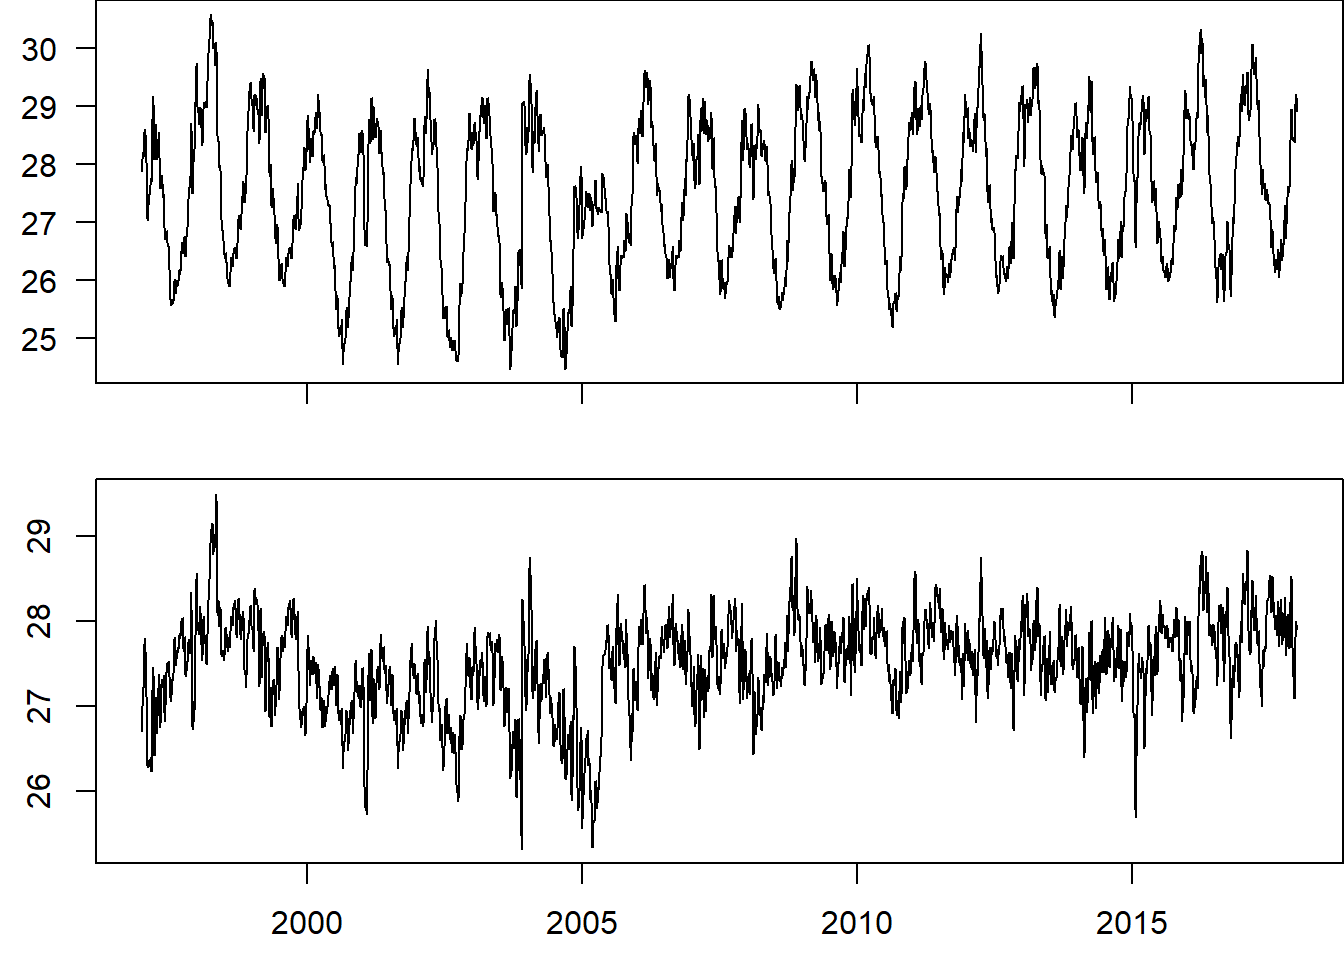 Time series of sea surface temperature before removing the seasonal variation (top pane) and after the seasonality removed (bottom panel)